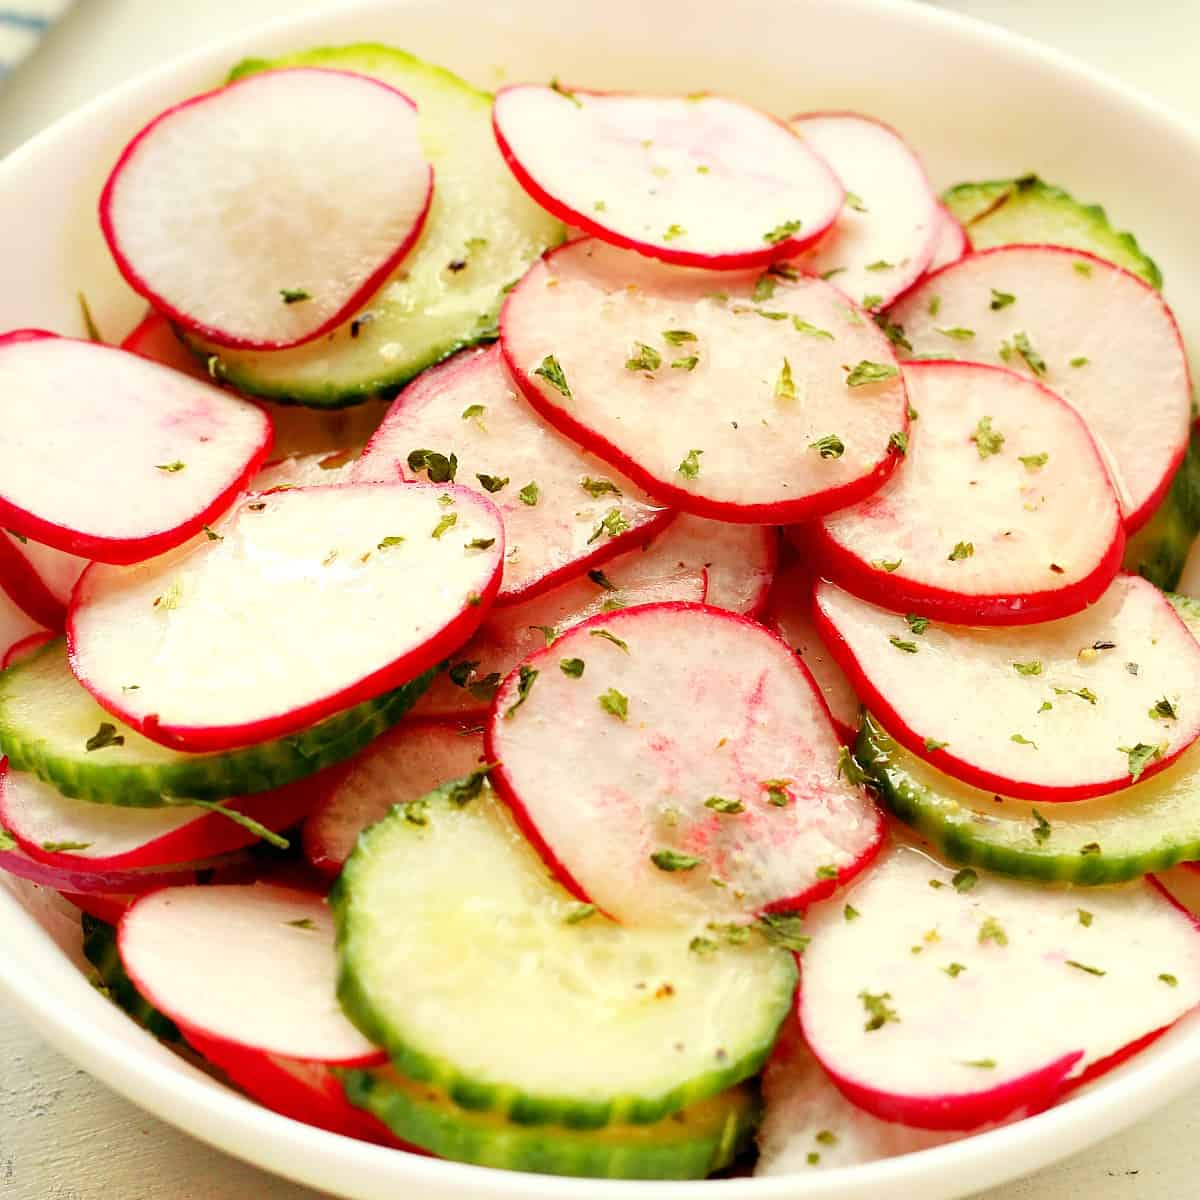 Radish and cucumber in a bowl.